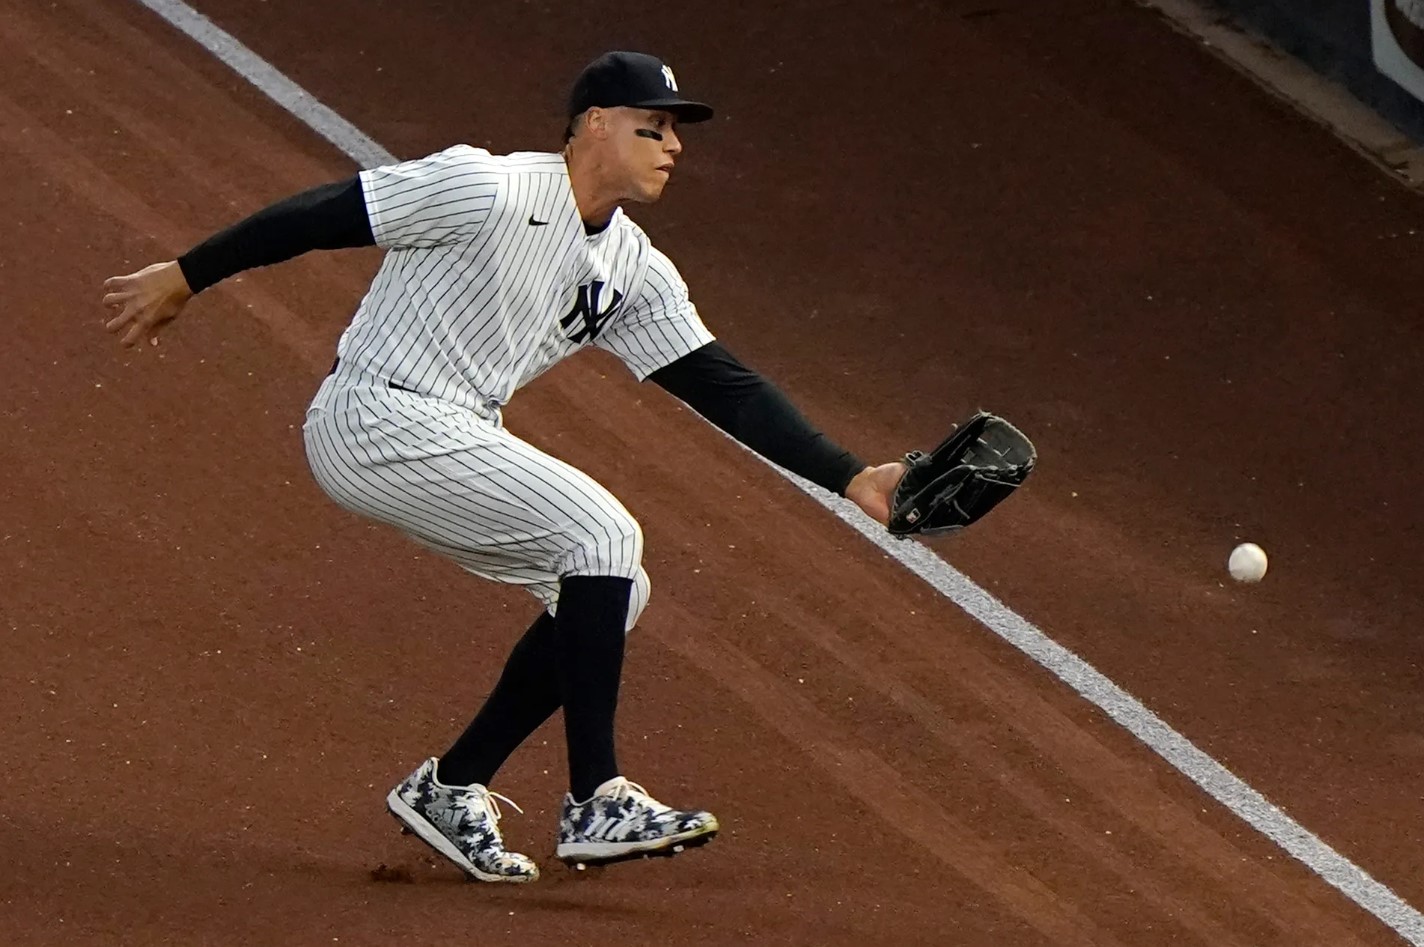 What Pros Wear: Aaron Judge's New Balance 3000v4 Cleats - What Pros Wear